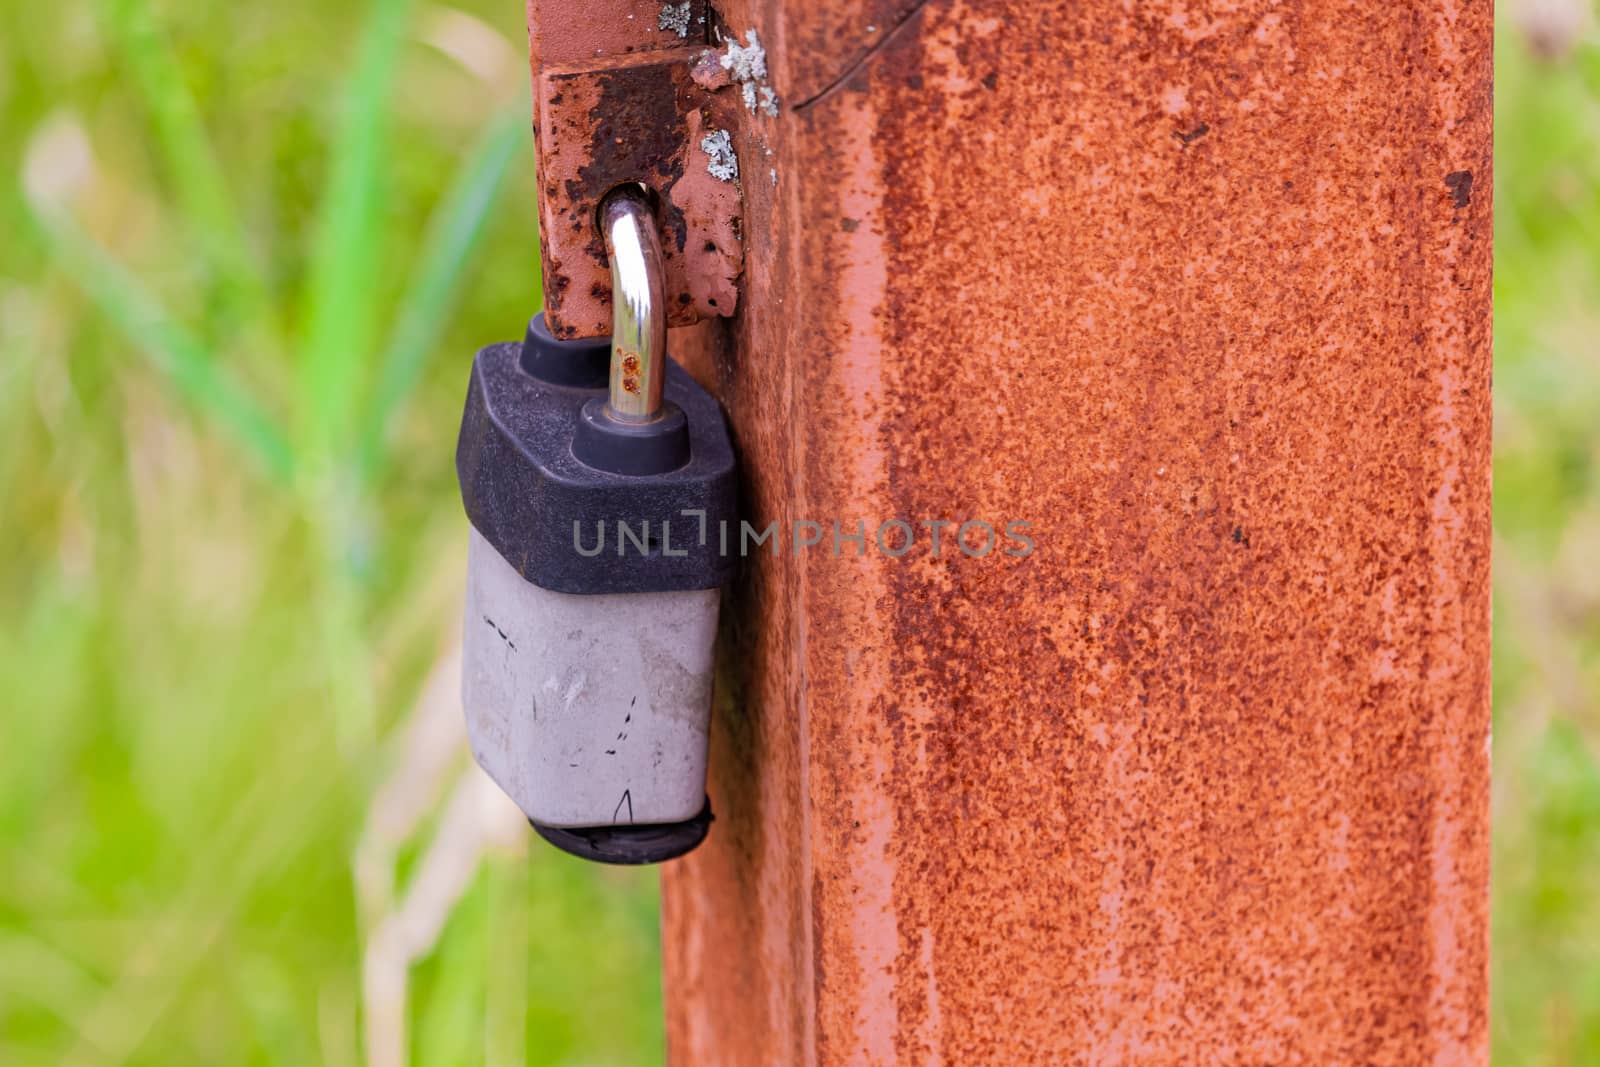 Rusty Electrical Access Post Locked by Padlock by colintemple